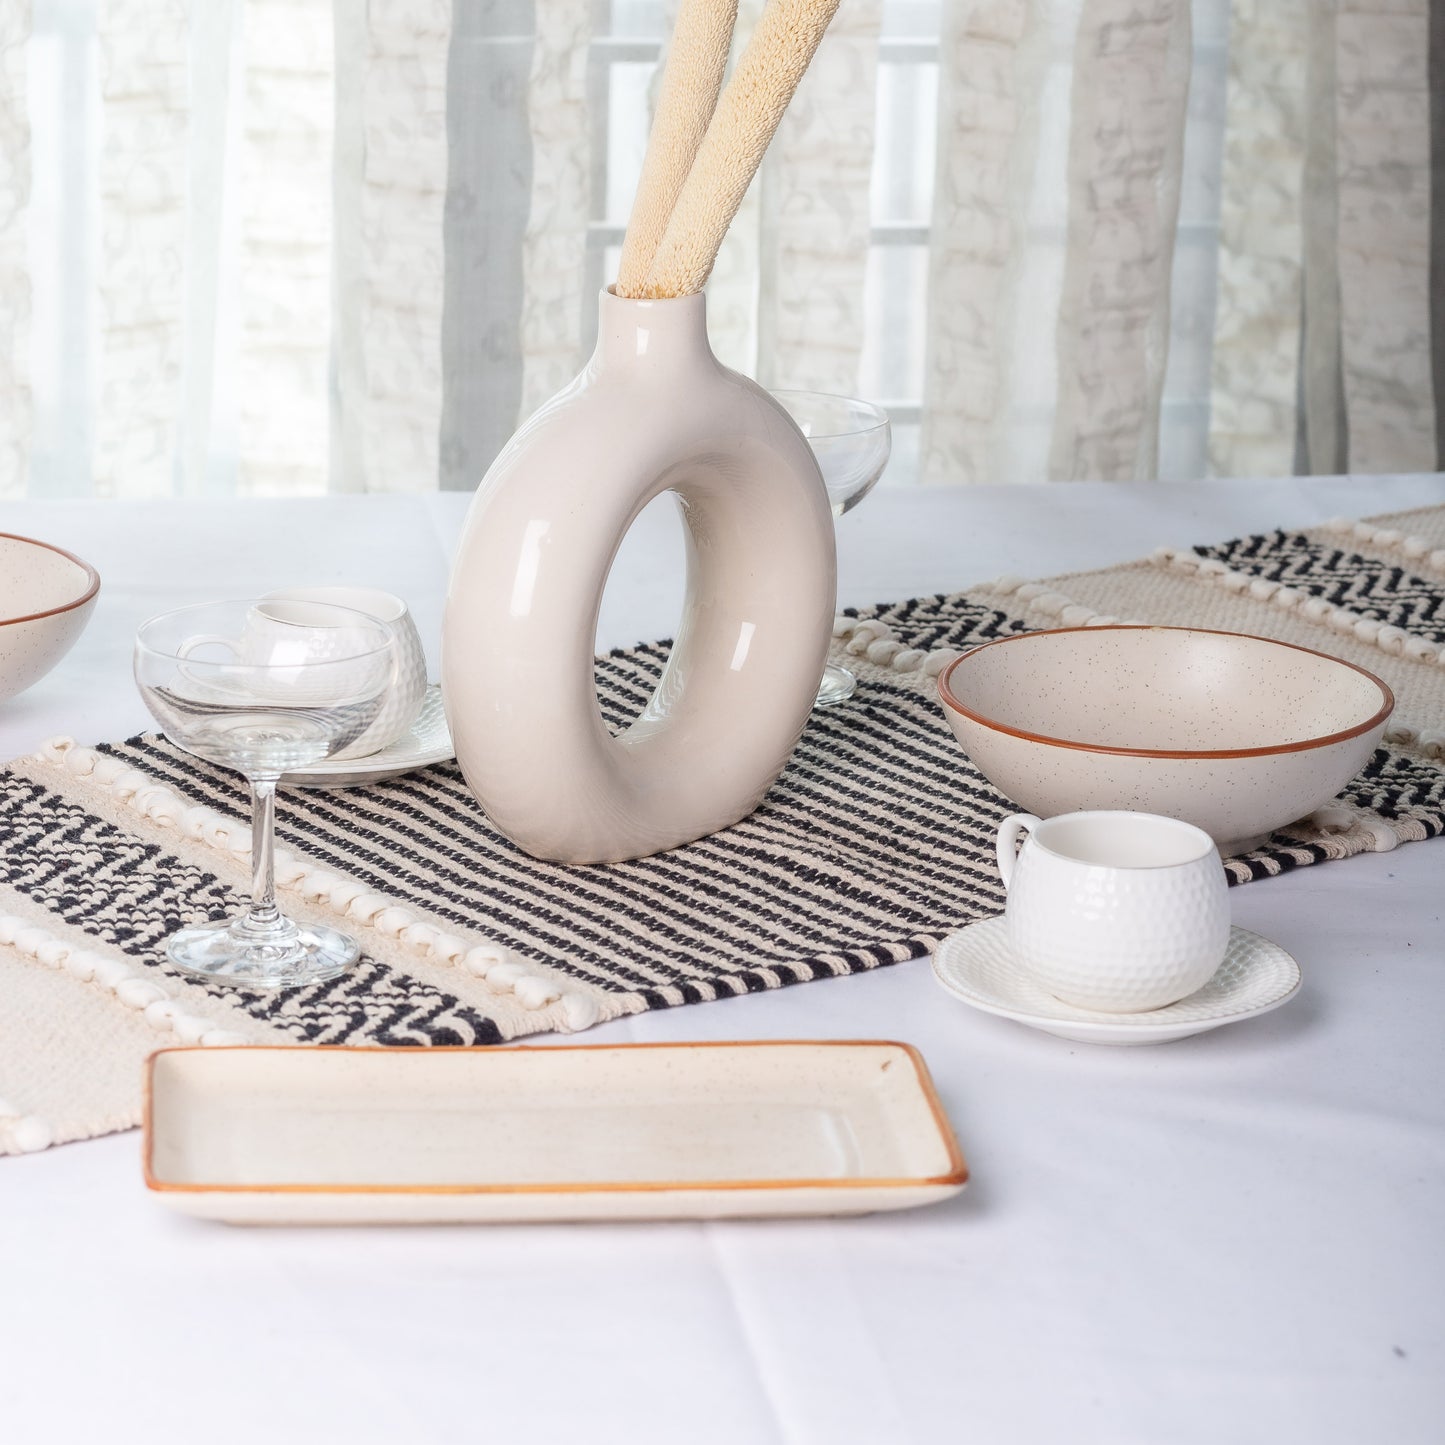 Knotted Strip Table runner setup